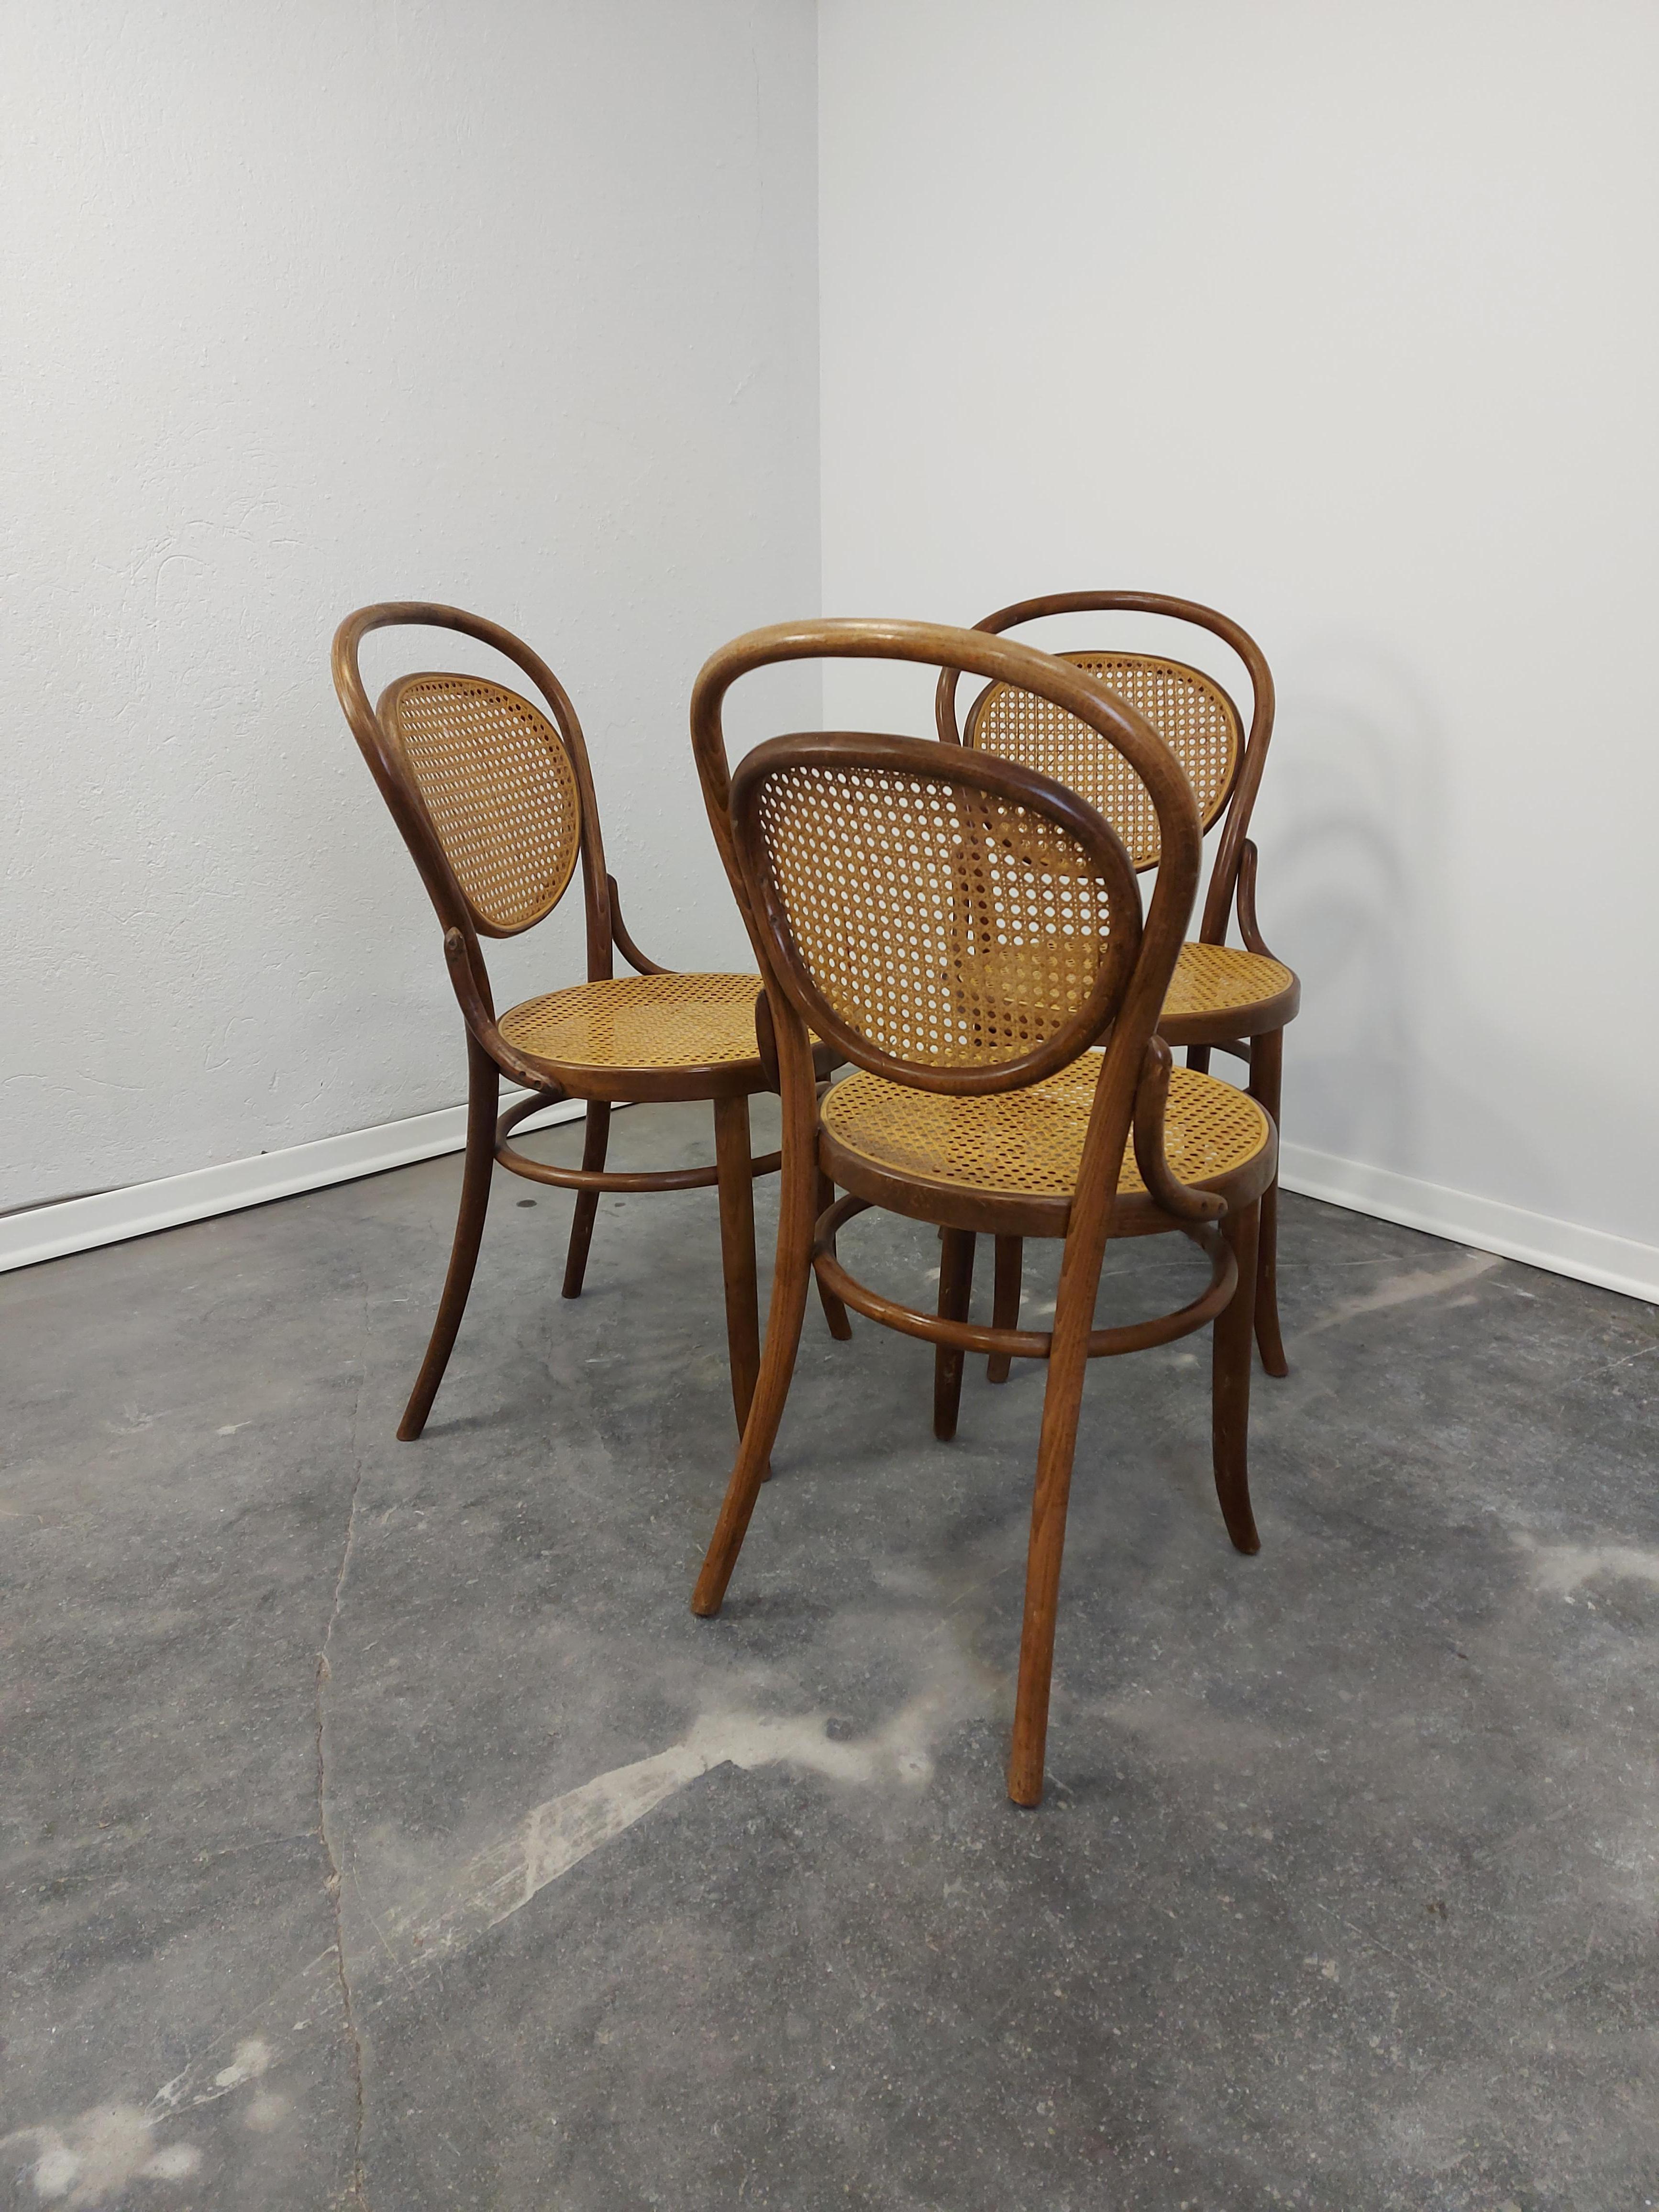 1 of 3 Thonet No. 215 chairs was manufactured 1960.
The chair was designed by Michael Thonet in 1859. 
It features a beech bentwood frame with cane. 
Clear wood finish. Wood and cane are in good condition. 
Price is for one chair.